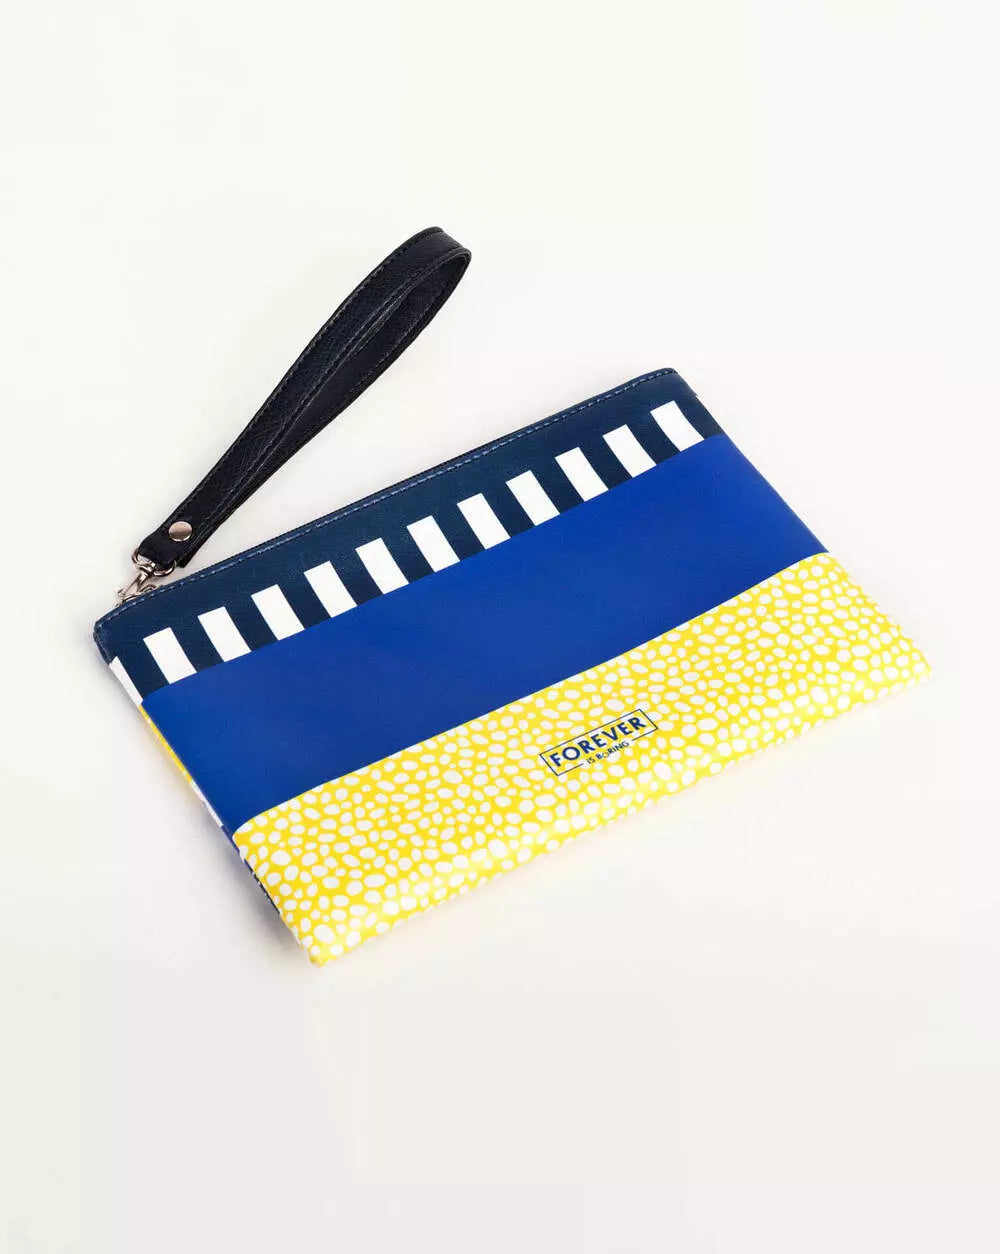 Forever is Boring Hop Pebbles YL Clutch front with three stripes, one in dark blue with horizontal white rectangles, one light blue and one yellow with white dots and with Forever is Boring logo.